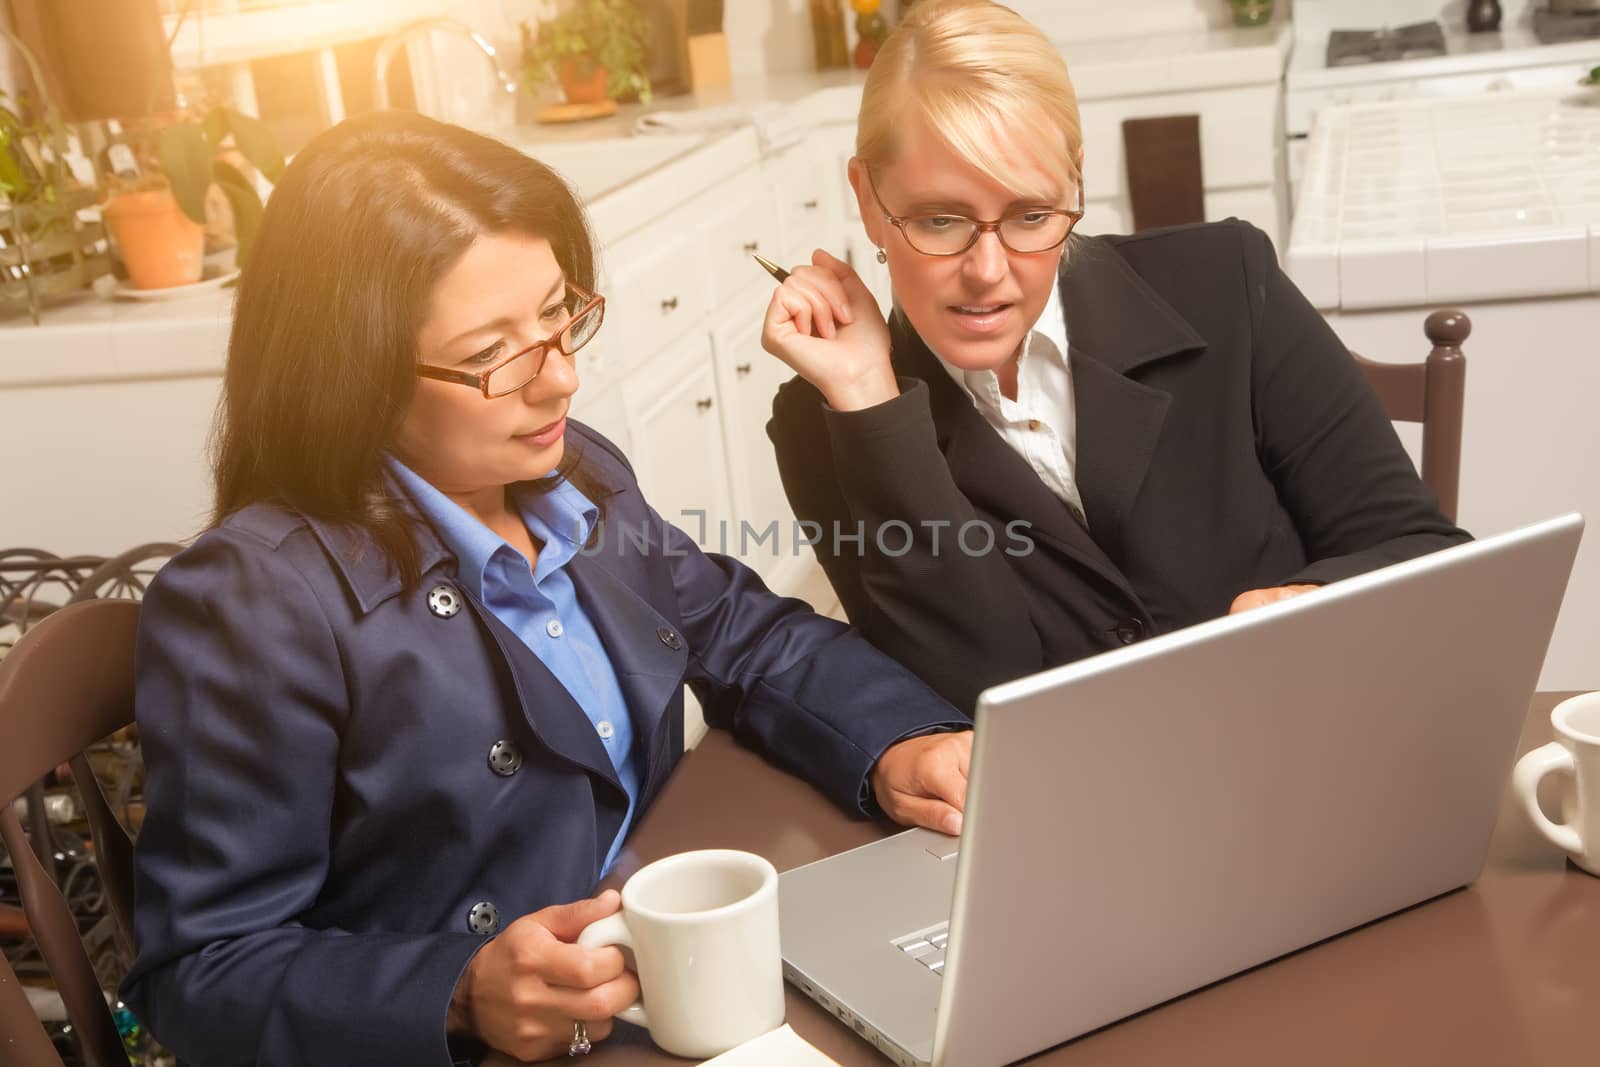 Businesswomen Working on the Laptop Together in the Kitchen.